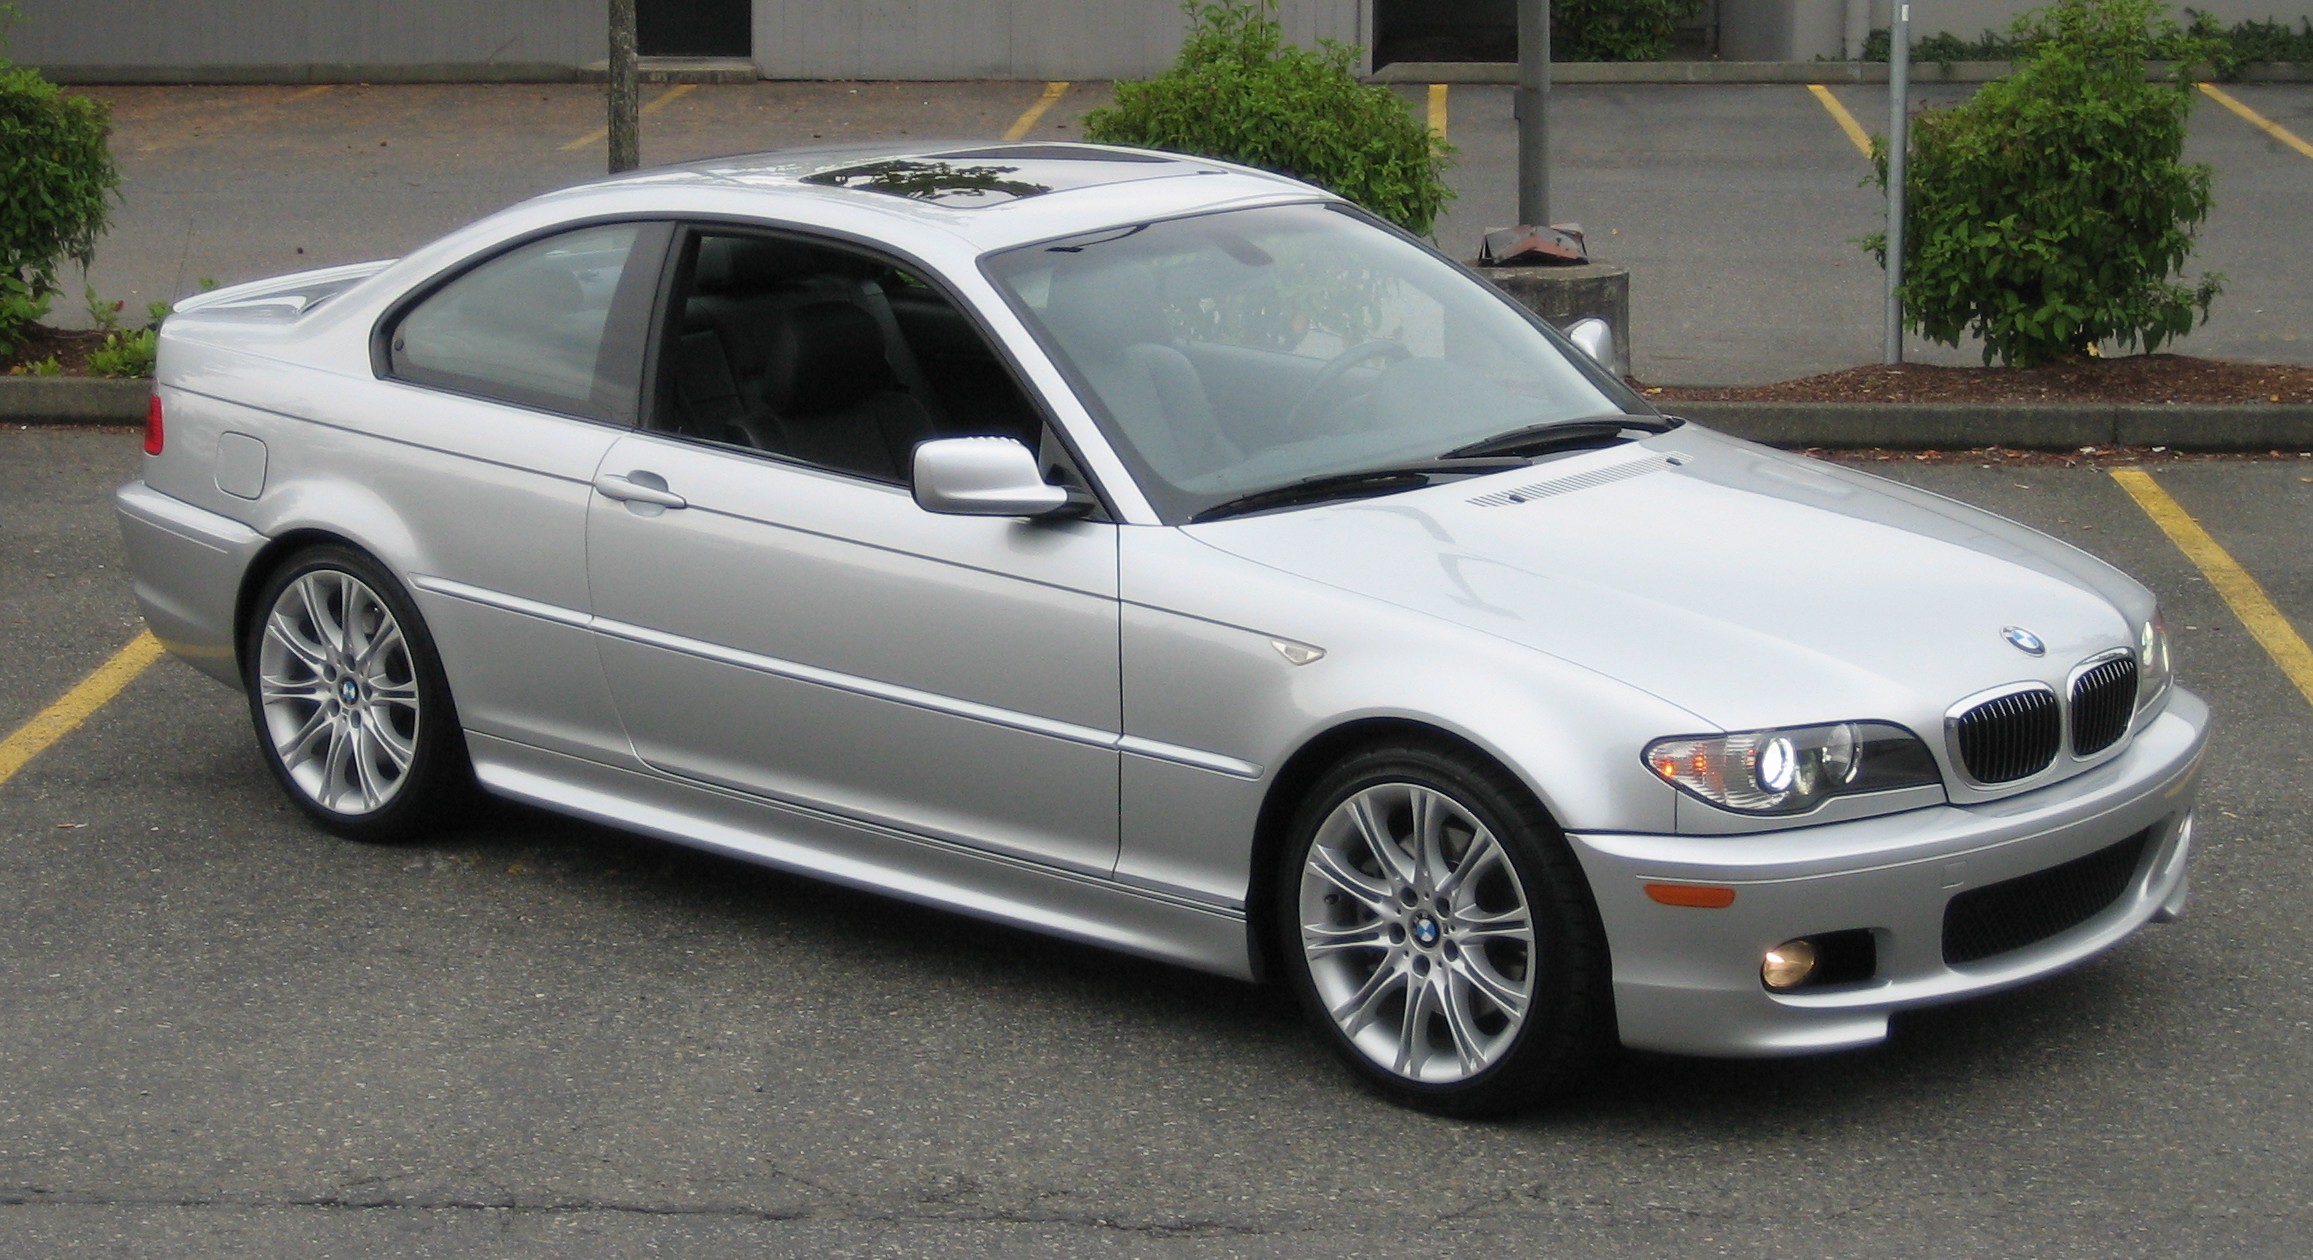 Dave's Discount Auto Parts has a large selection of BMW 330i parts in stock